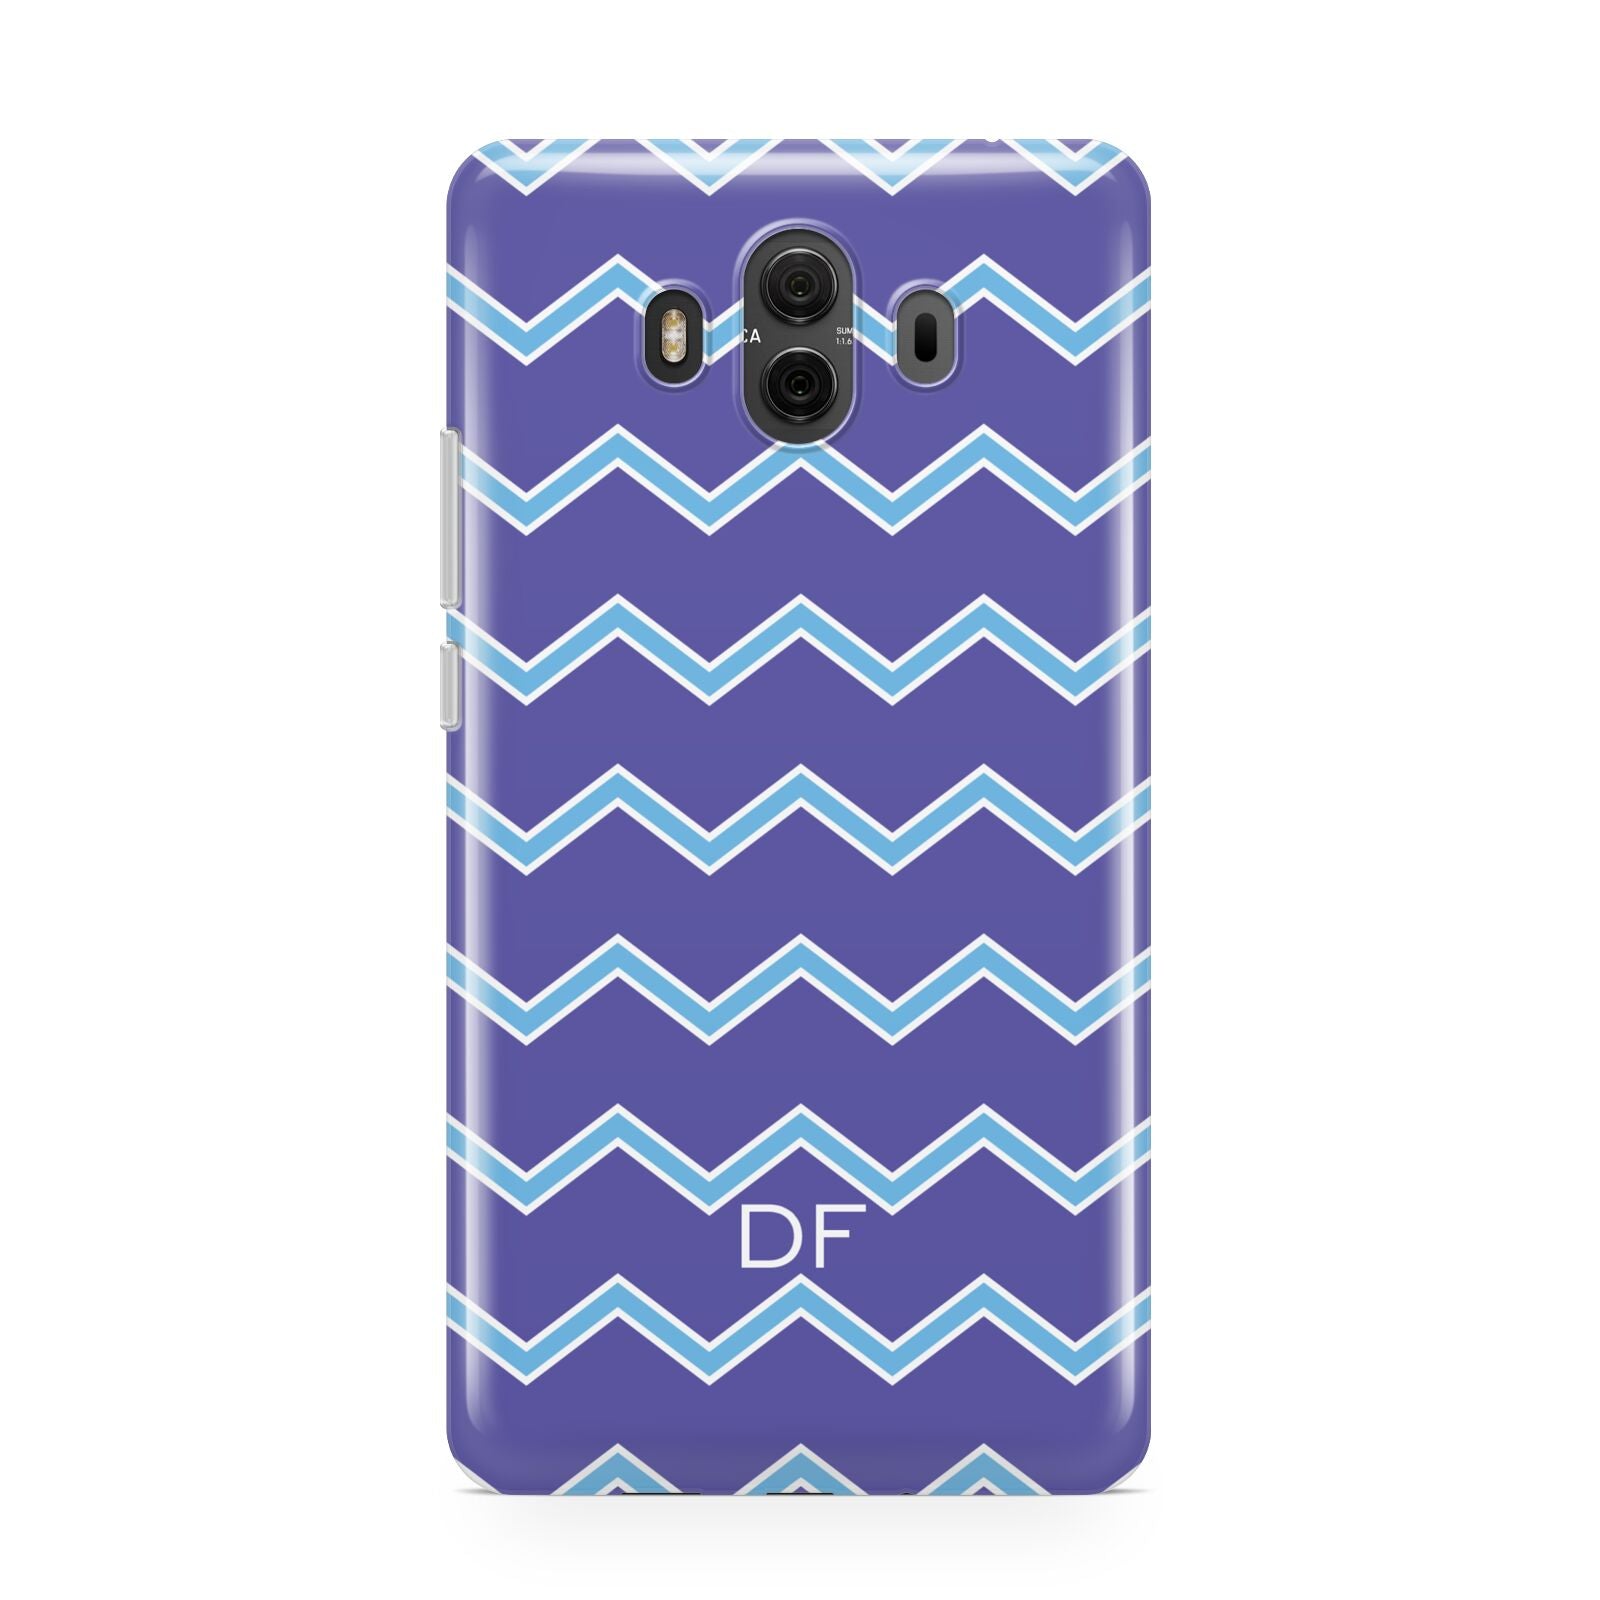 Personalised Chevron 2 Tone Huawei Mate 10 Protective Phone Case